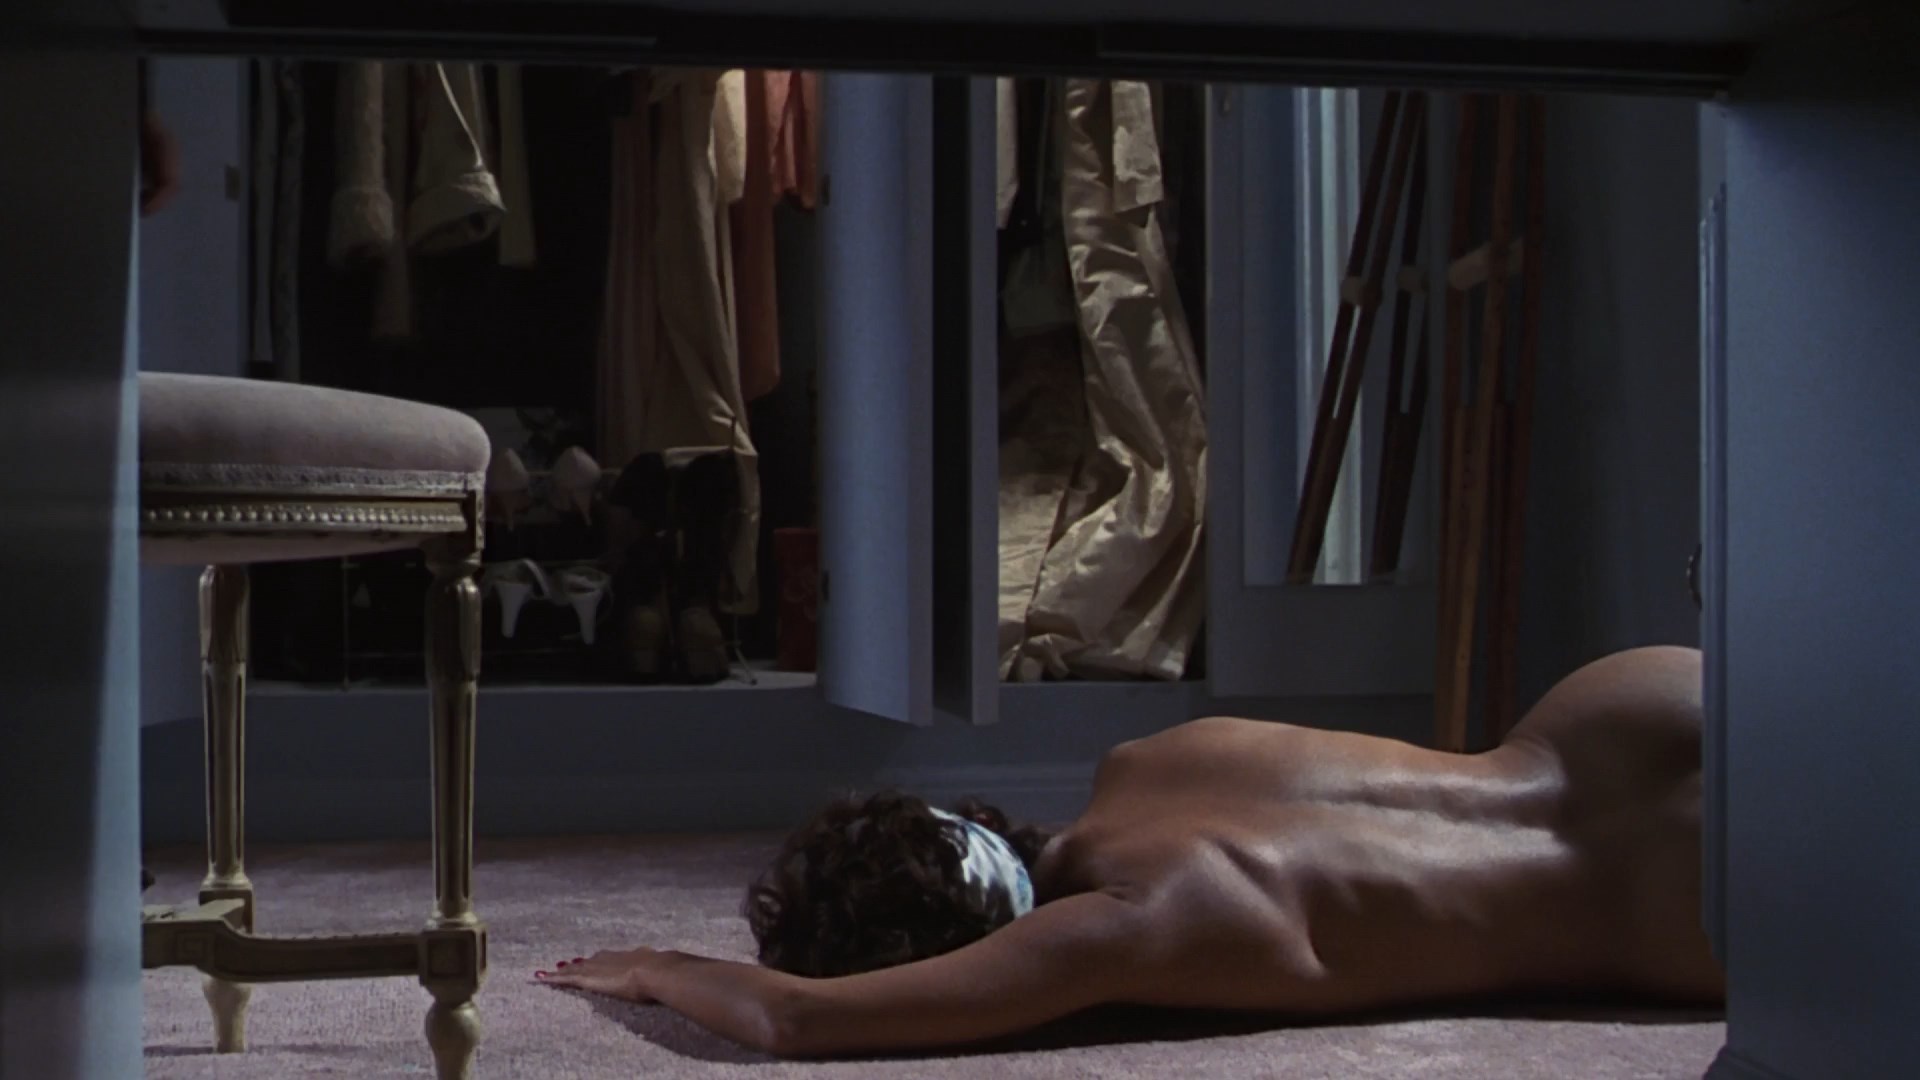 Halle Berry is laying on the floor naked and dead. 